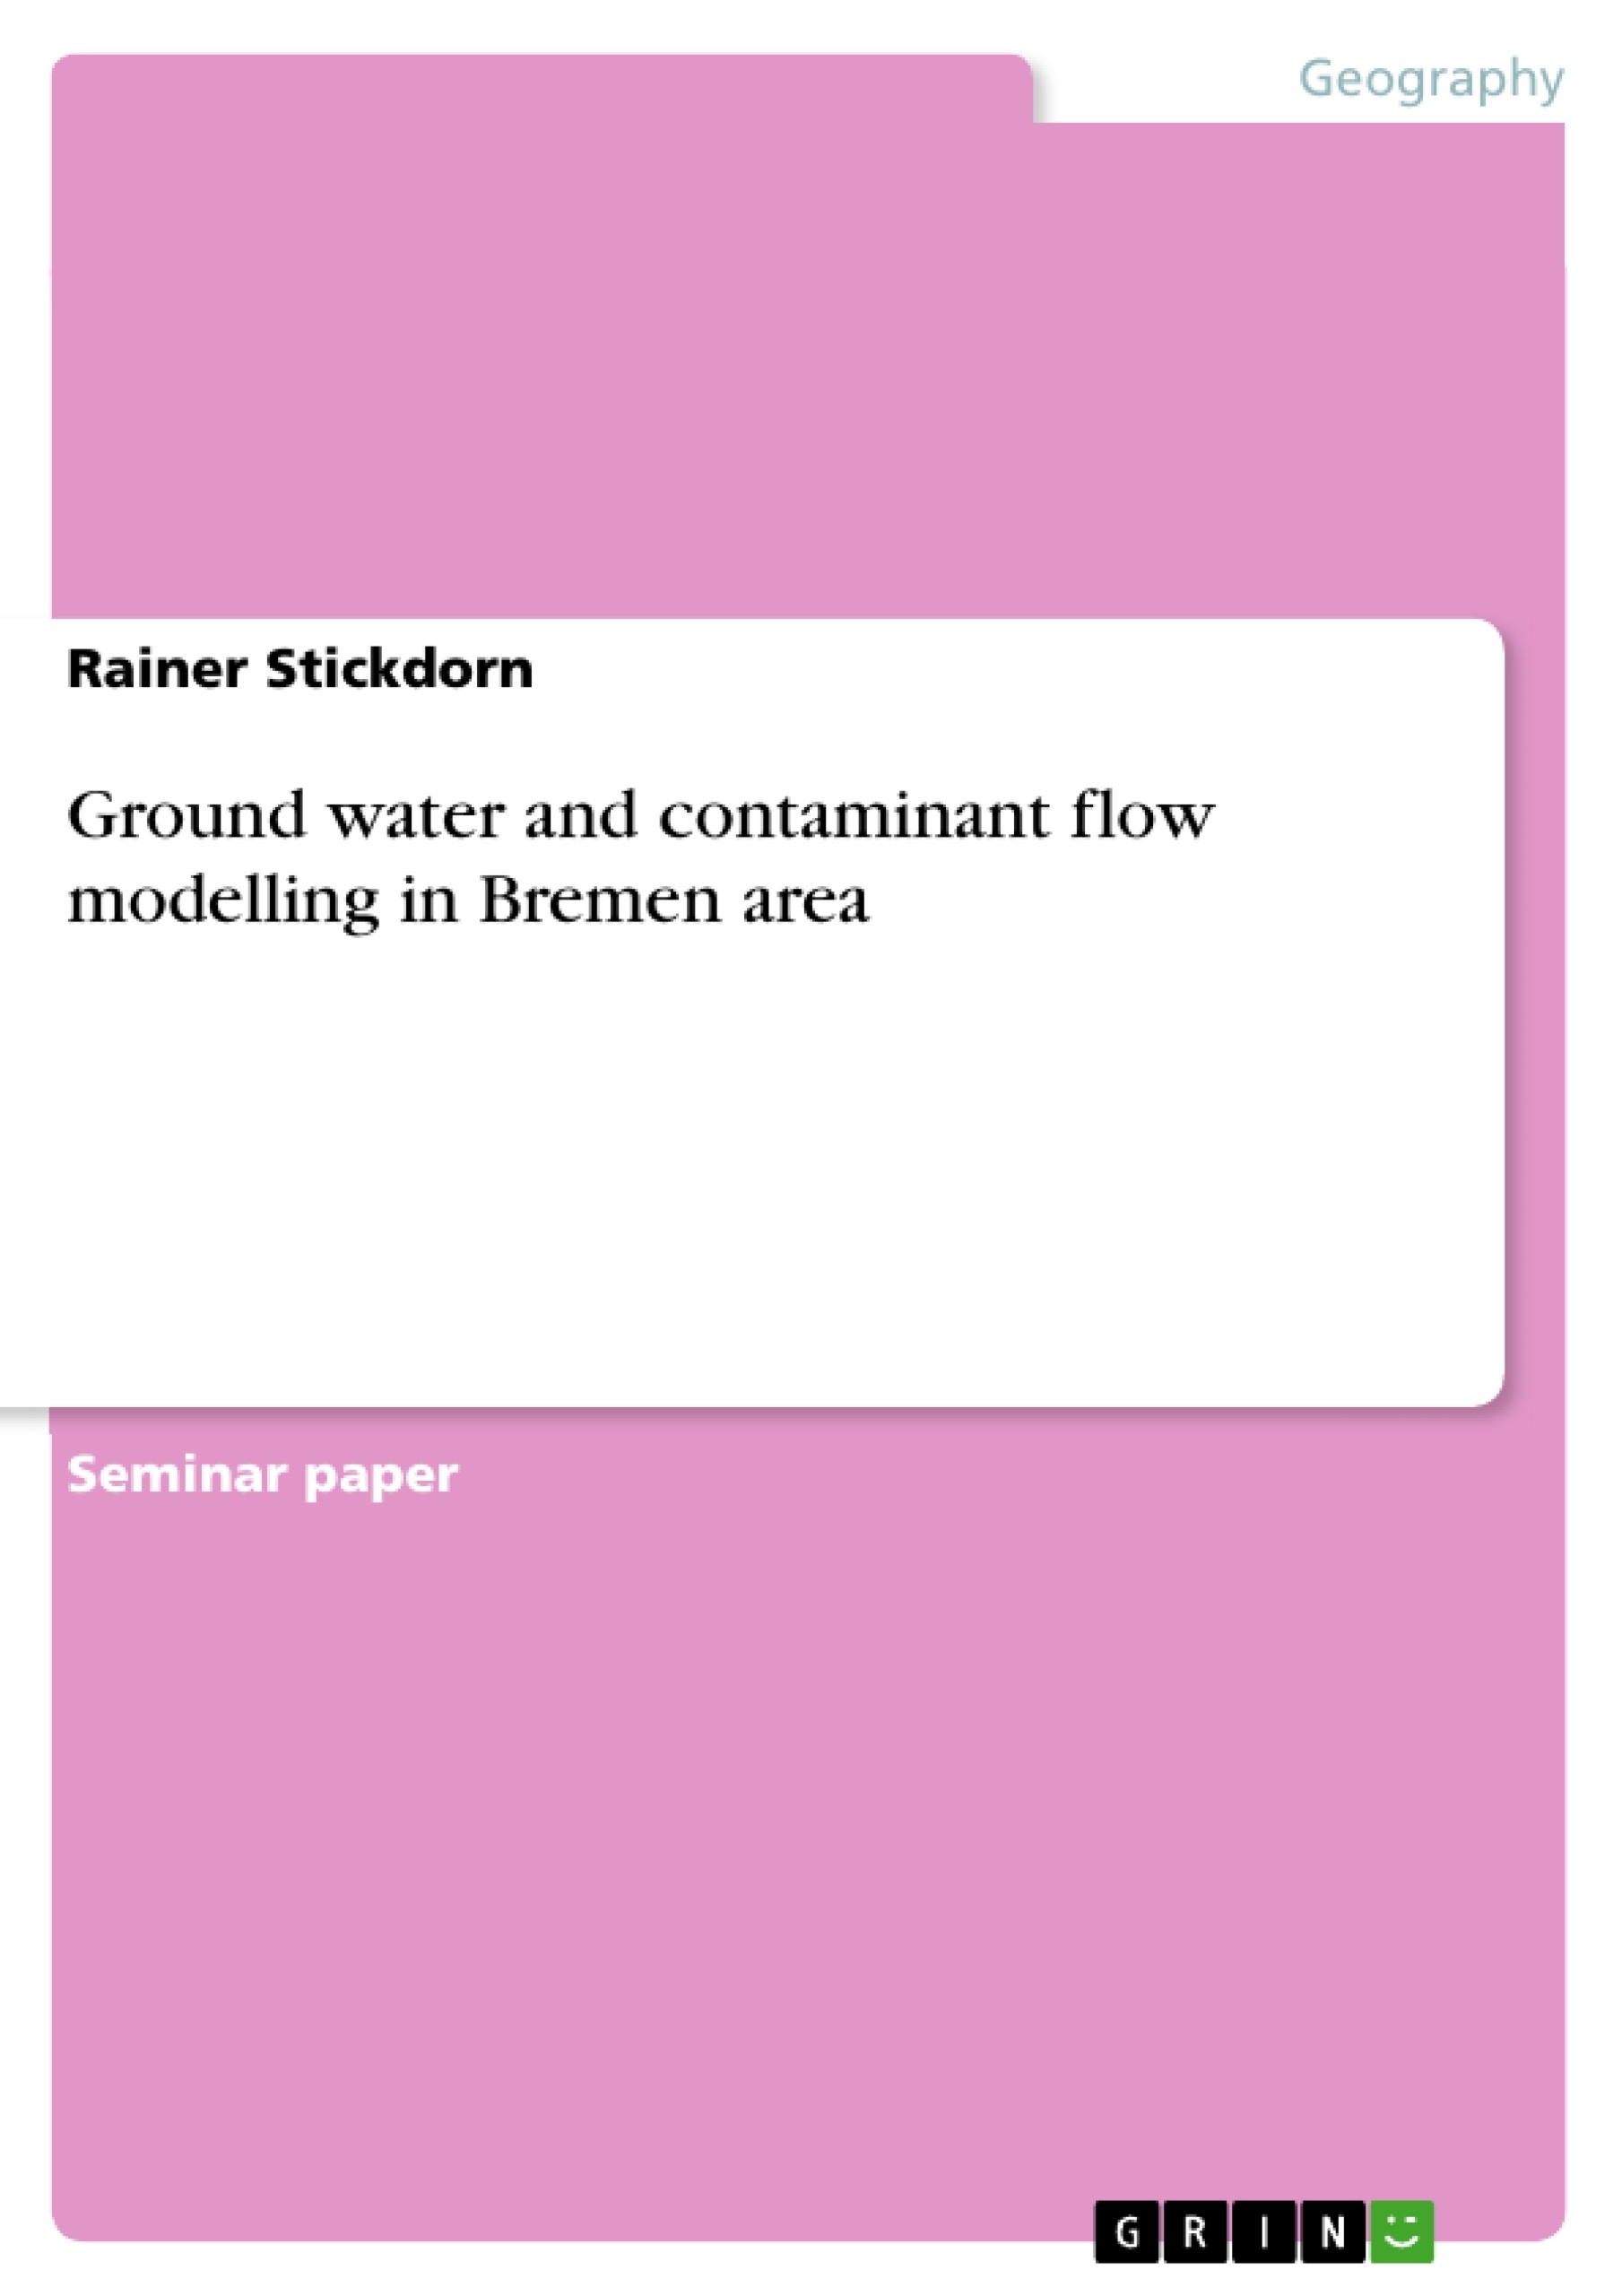 Title: Ground water and contaminant flow modelling in Bremen area